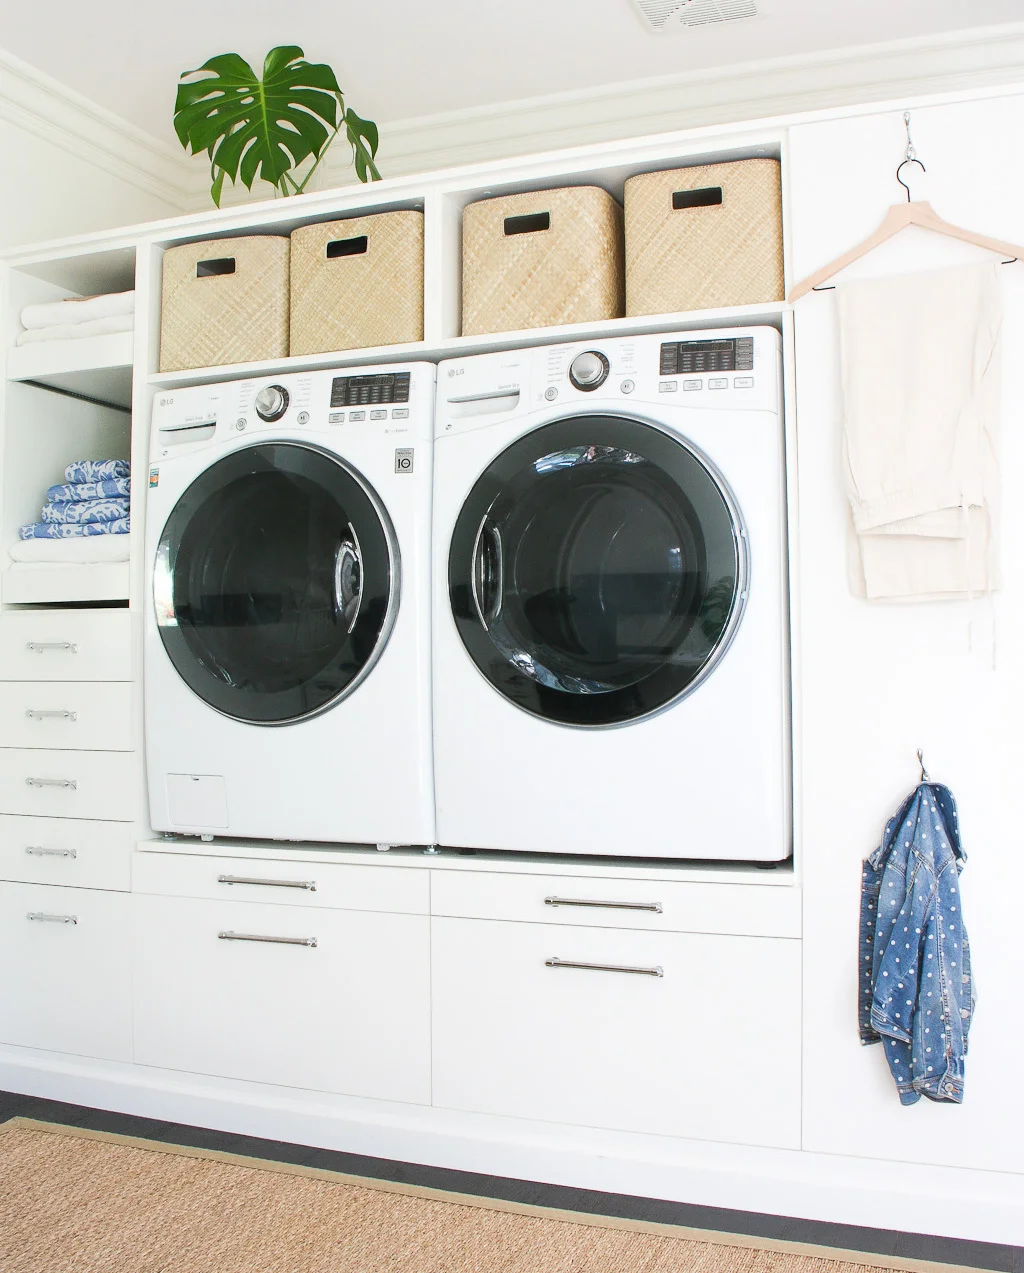 laundry room wall with shelf above and below for baskets, pull-out shelves on side for supplies, white with seagrass rug on wood floor